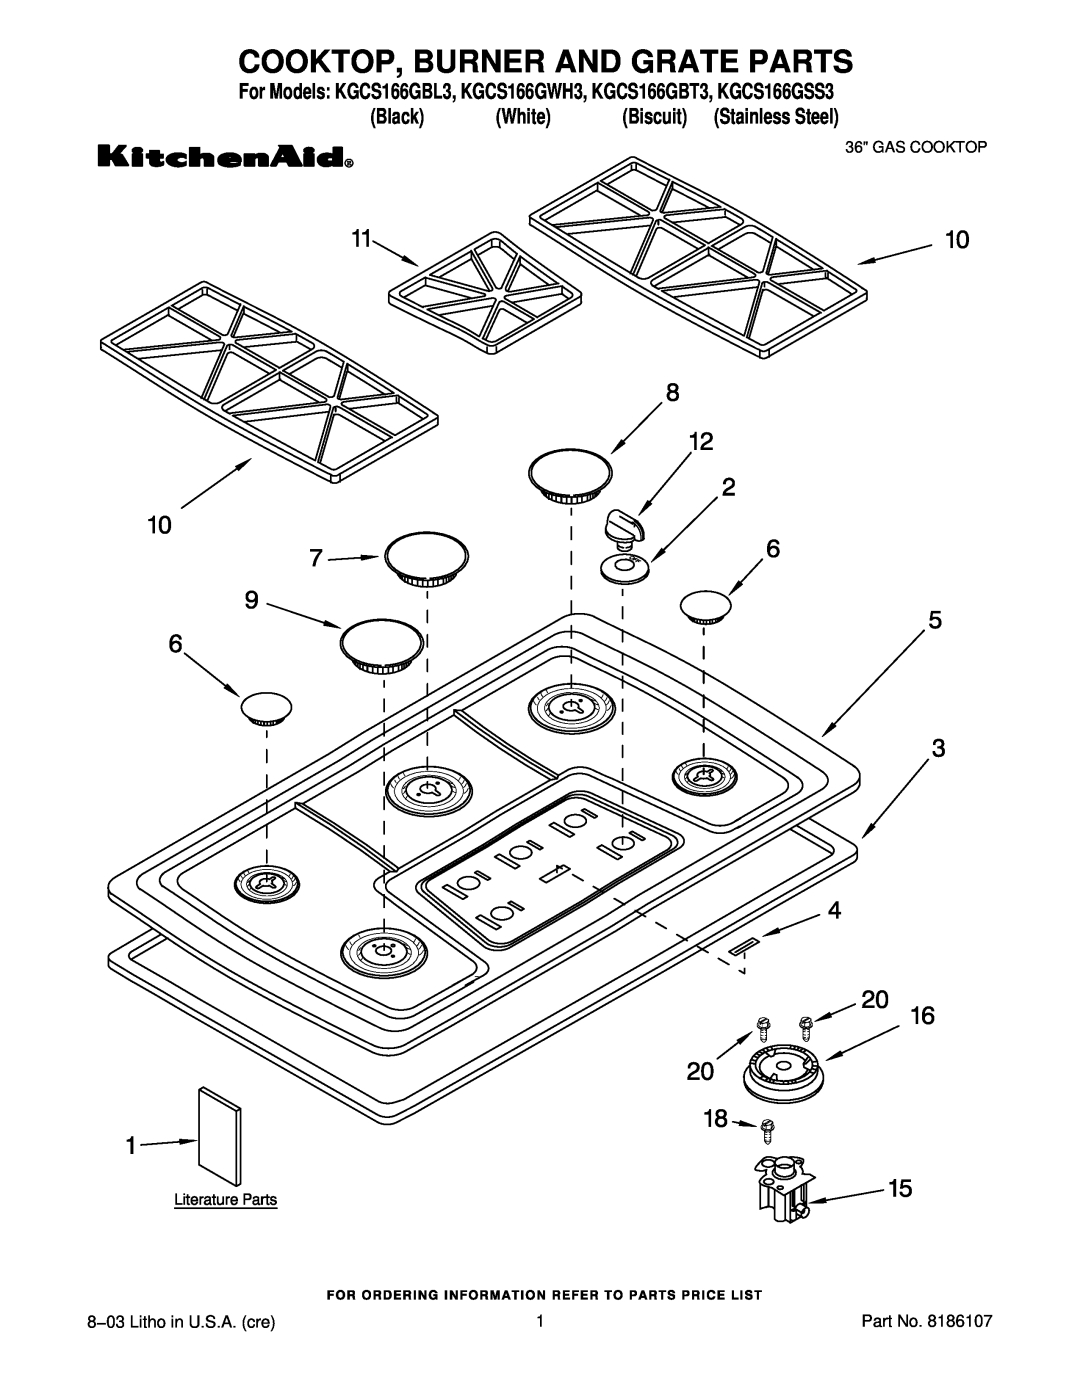 KitchenAid KGCS166GWH3 manual Cooktop, Burner And Grate Parts, Black, White, Biscuit, Stainless Steel, Gas Cooktop 